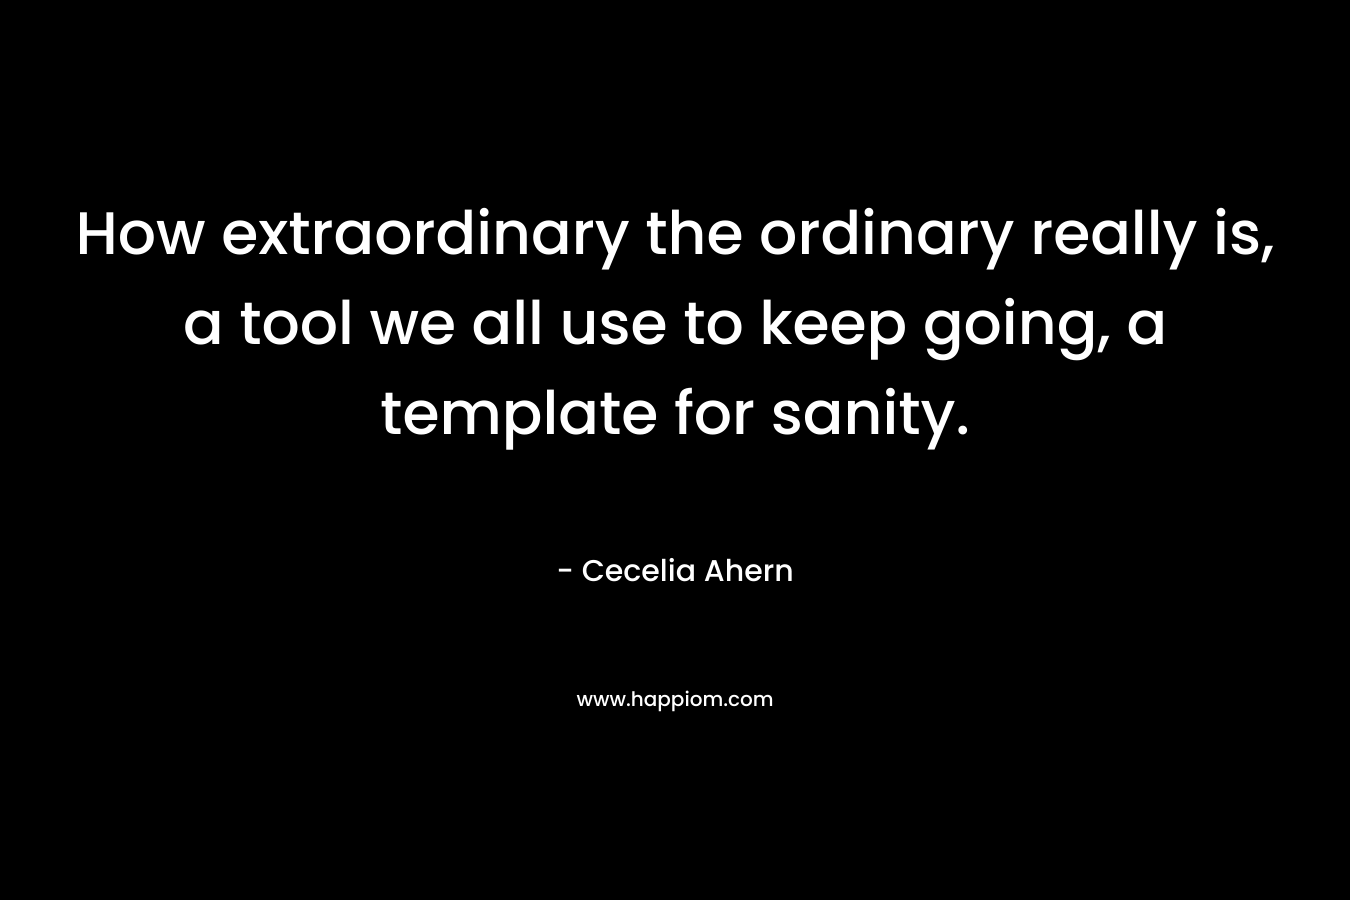 How extraordinary the ordinary really is, a tool we all use to keep going, a template for sanity. – Cecelia Ahern